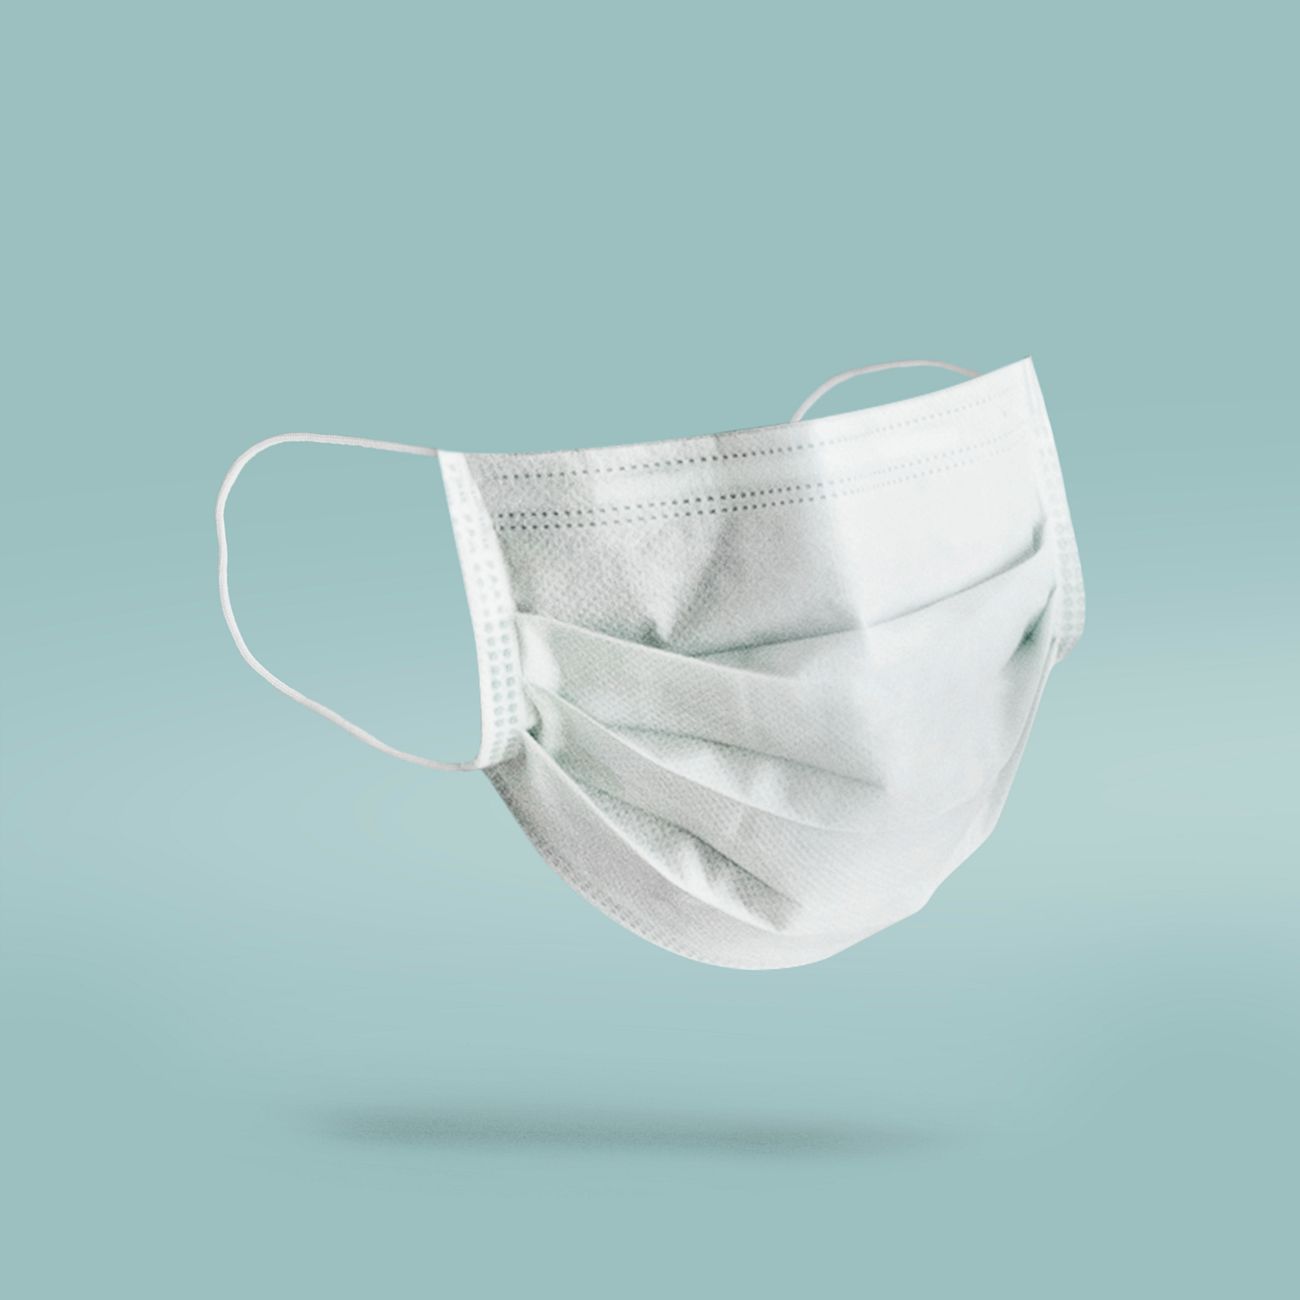 Download Surgical mask to prevent coronavirus infection mockup ...